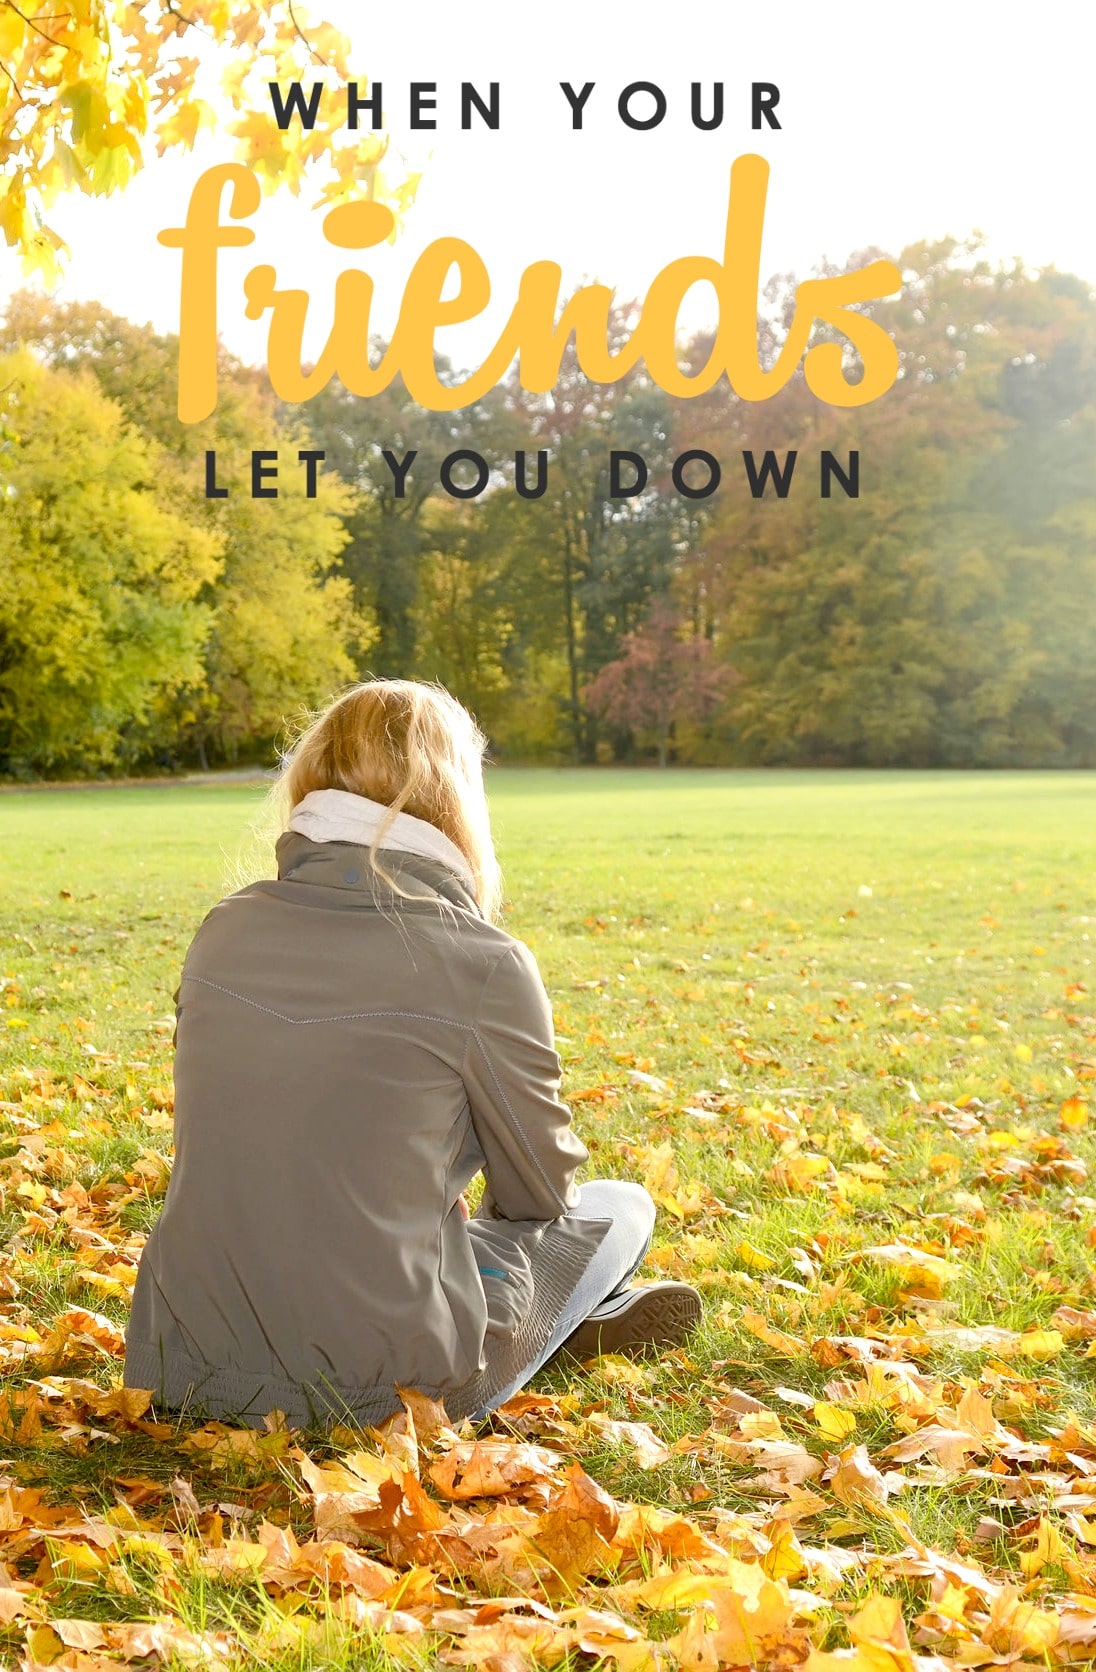 When Your Friends Let You Down | What to Do When a Friendship Fails